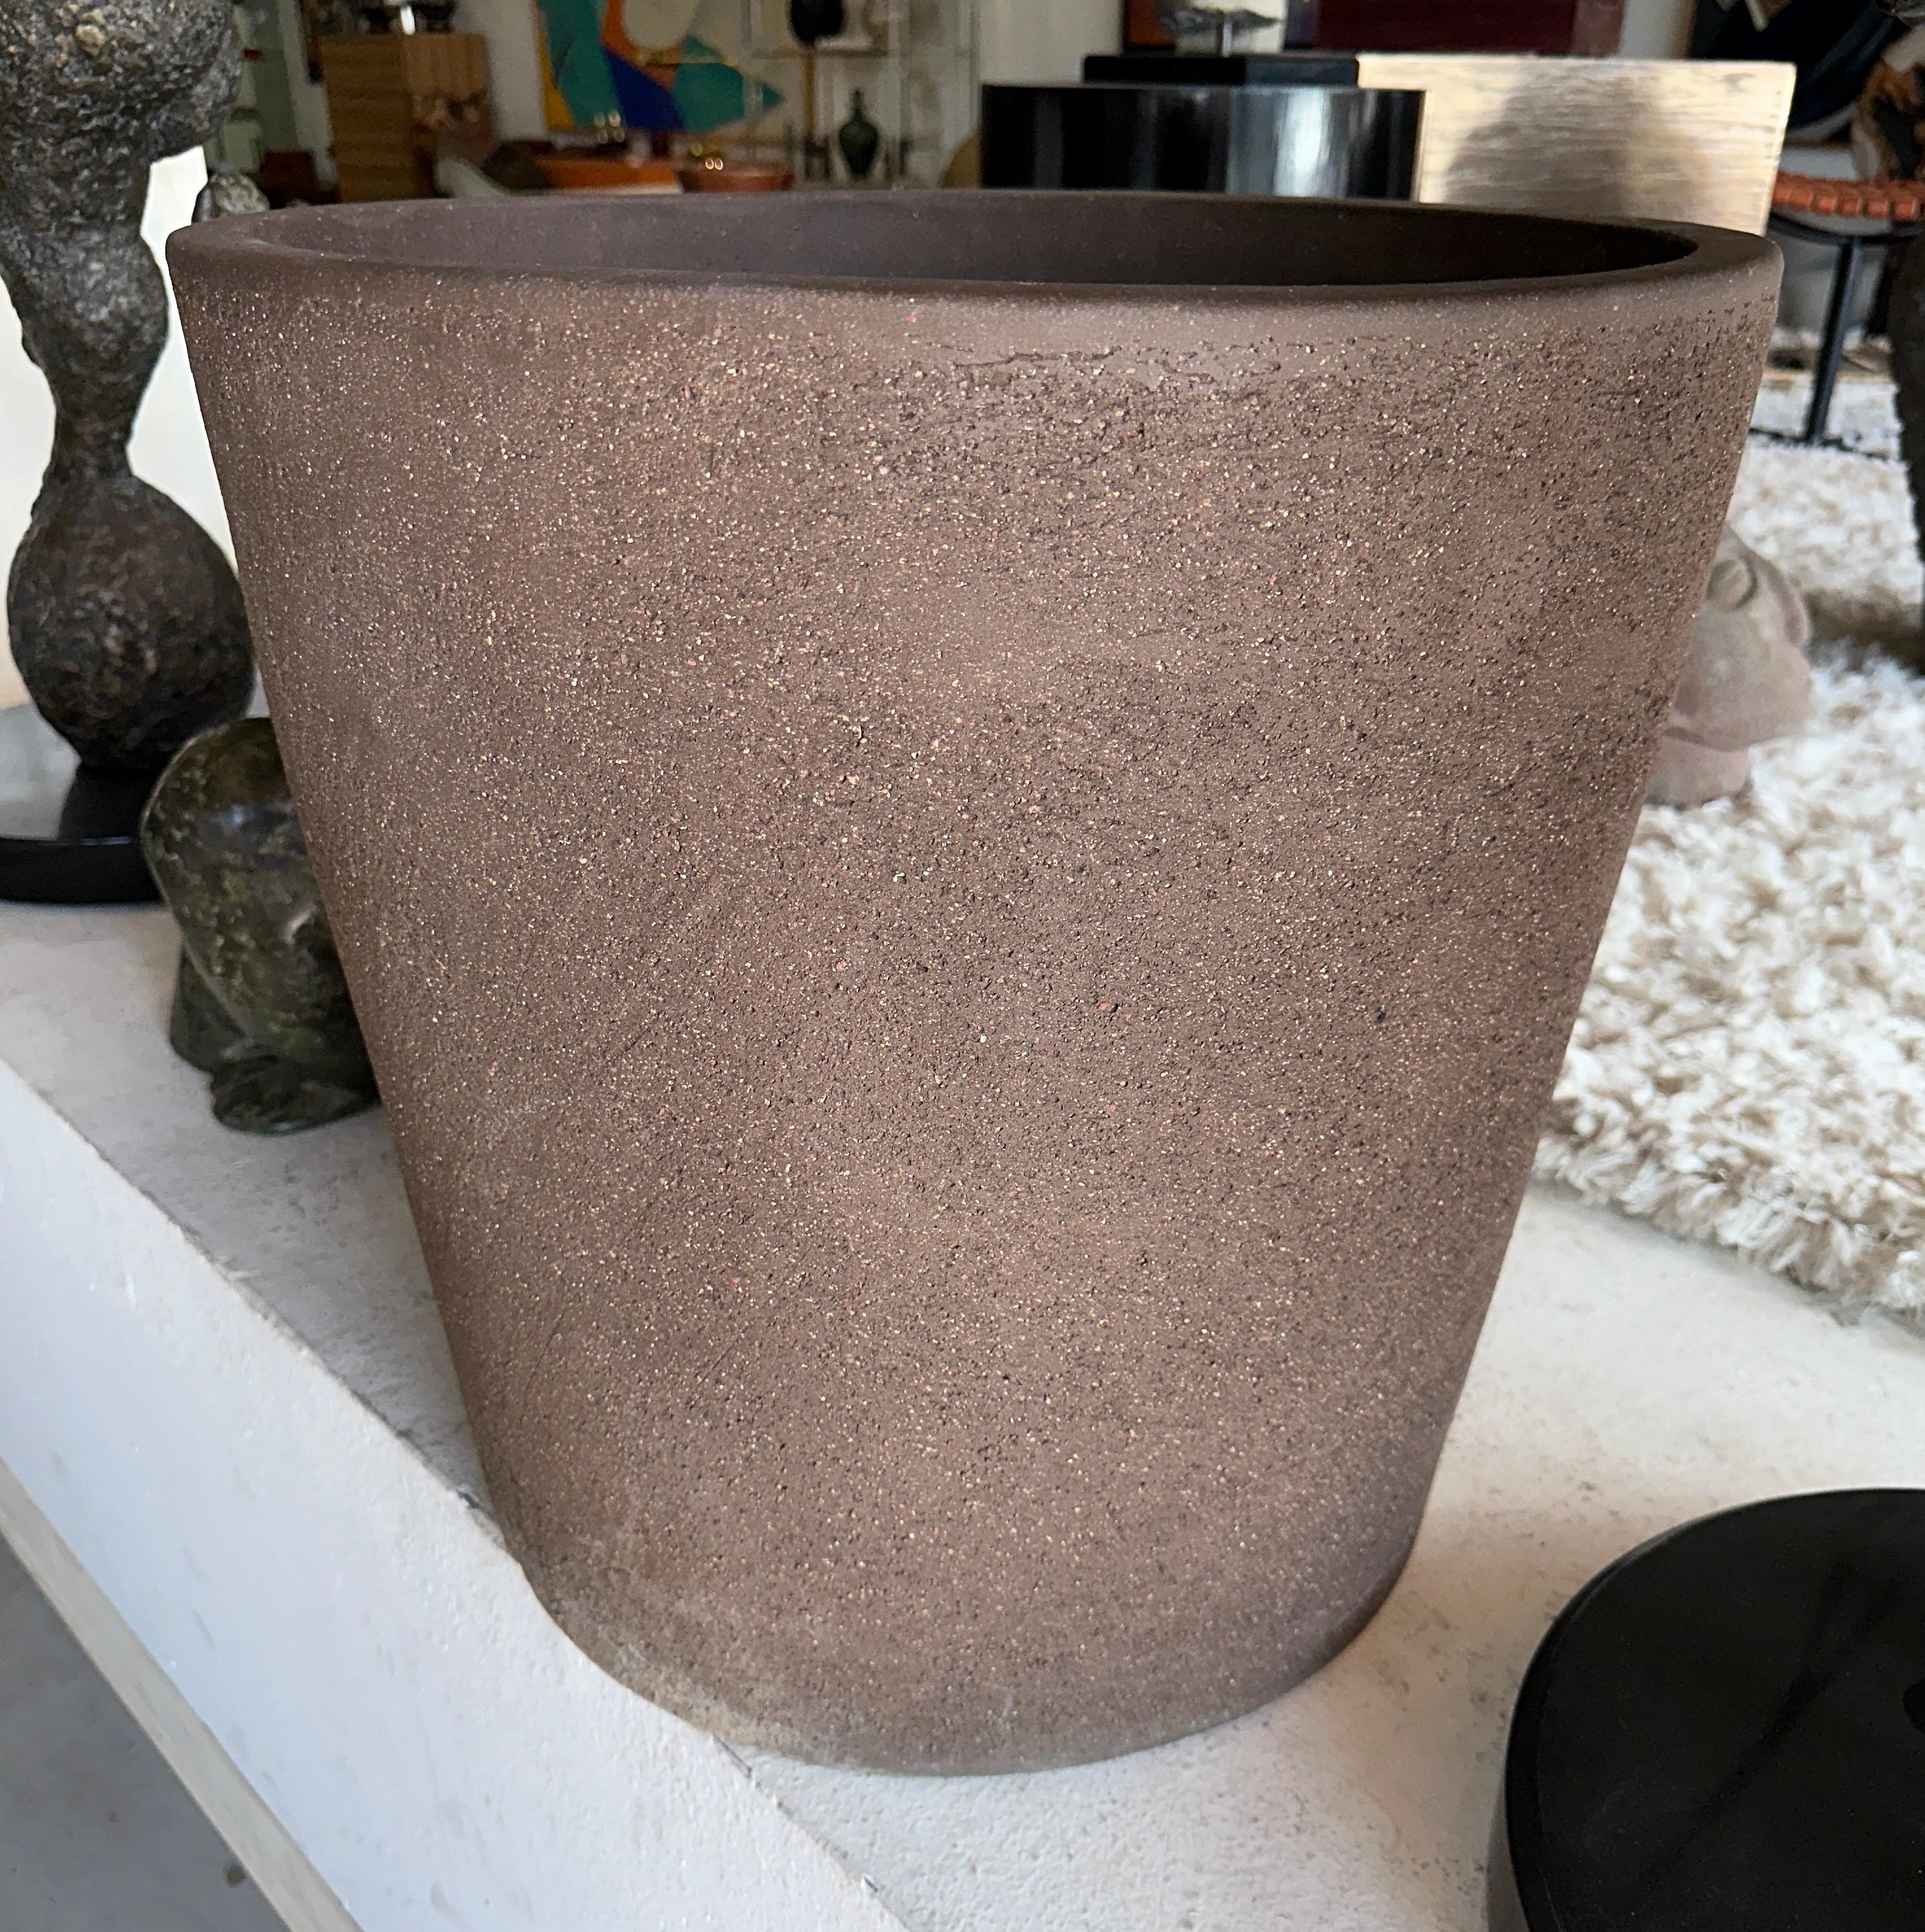 A massive architectural stoneware planter in the manner of David Cressey for Architectural Pottery or Stan Bitters. This piece of pottery was acquired from a wonderful Palm Springs estate that featured beautiful art and furnishings from major names